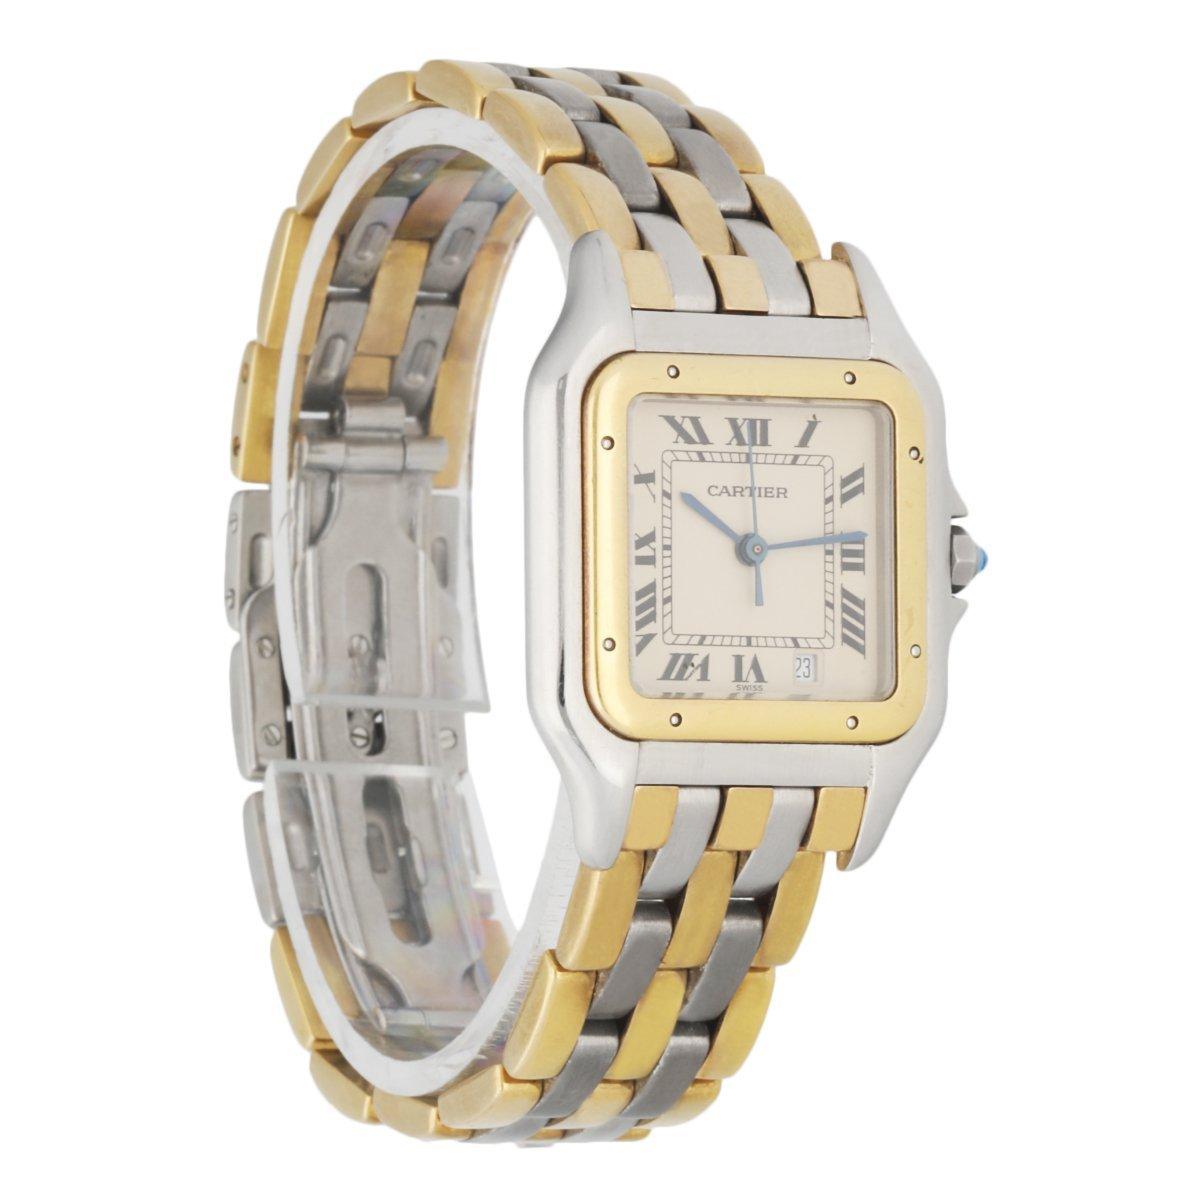 Cartier Panthere 187949 Midsize Ladies Watch. 27mm stainless steel case with an 18k yellow gold bezel. Off white dial with blue steel hands and black roman numeral hour markers. Date display at the 5 o'clock position. Stainless steel with three rows